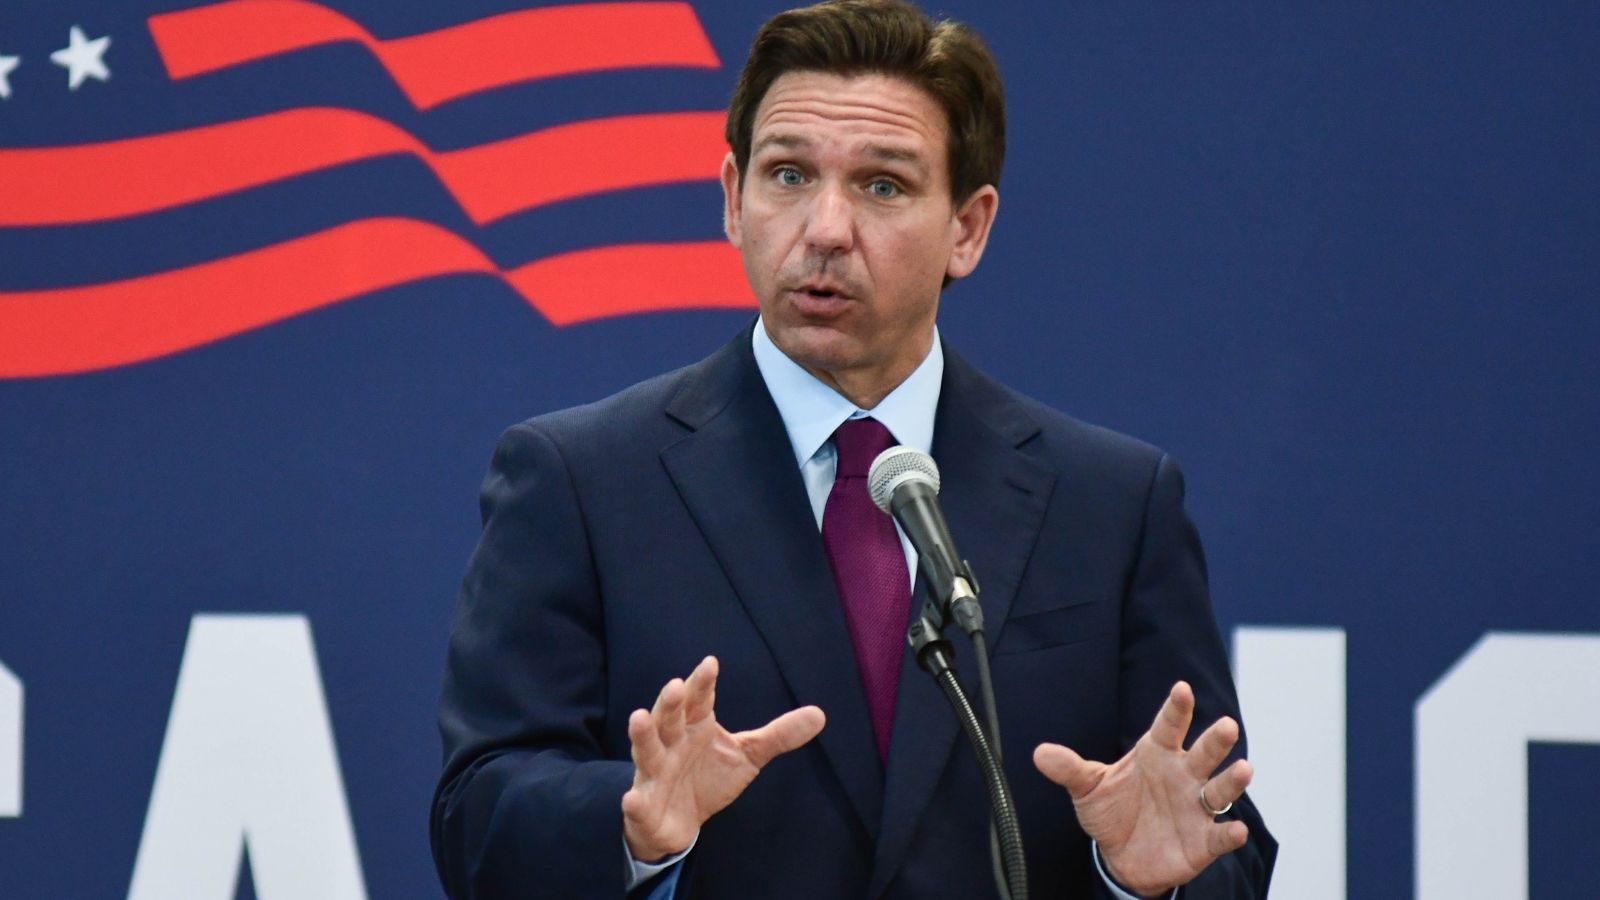 “A Ridiculous Attempt at Whitewashing History”: Florida Churches Reject DeSantis’ War on Black History